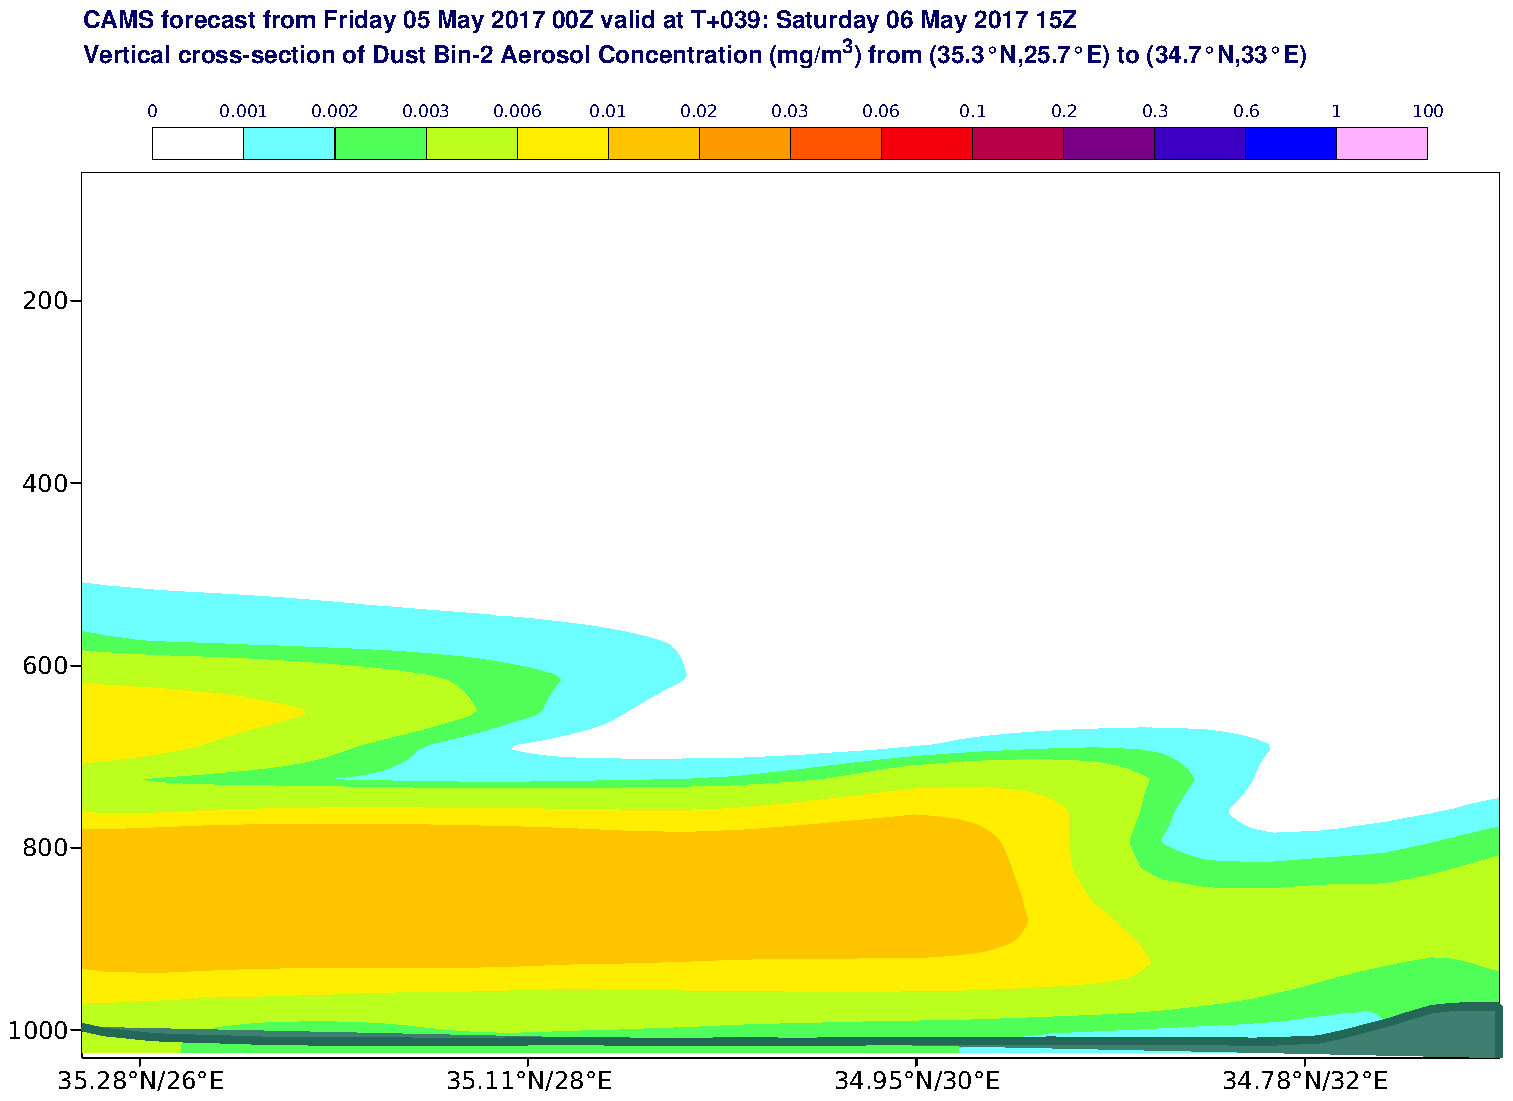 Vertical cross-section of Dust Bin-2 Aerosol Concentration (mg/m3) valid at T39 - 2017-05-06 15:00